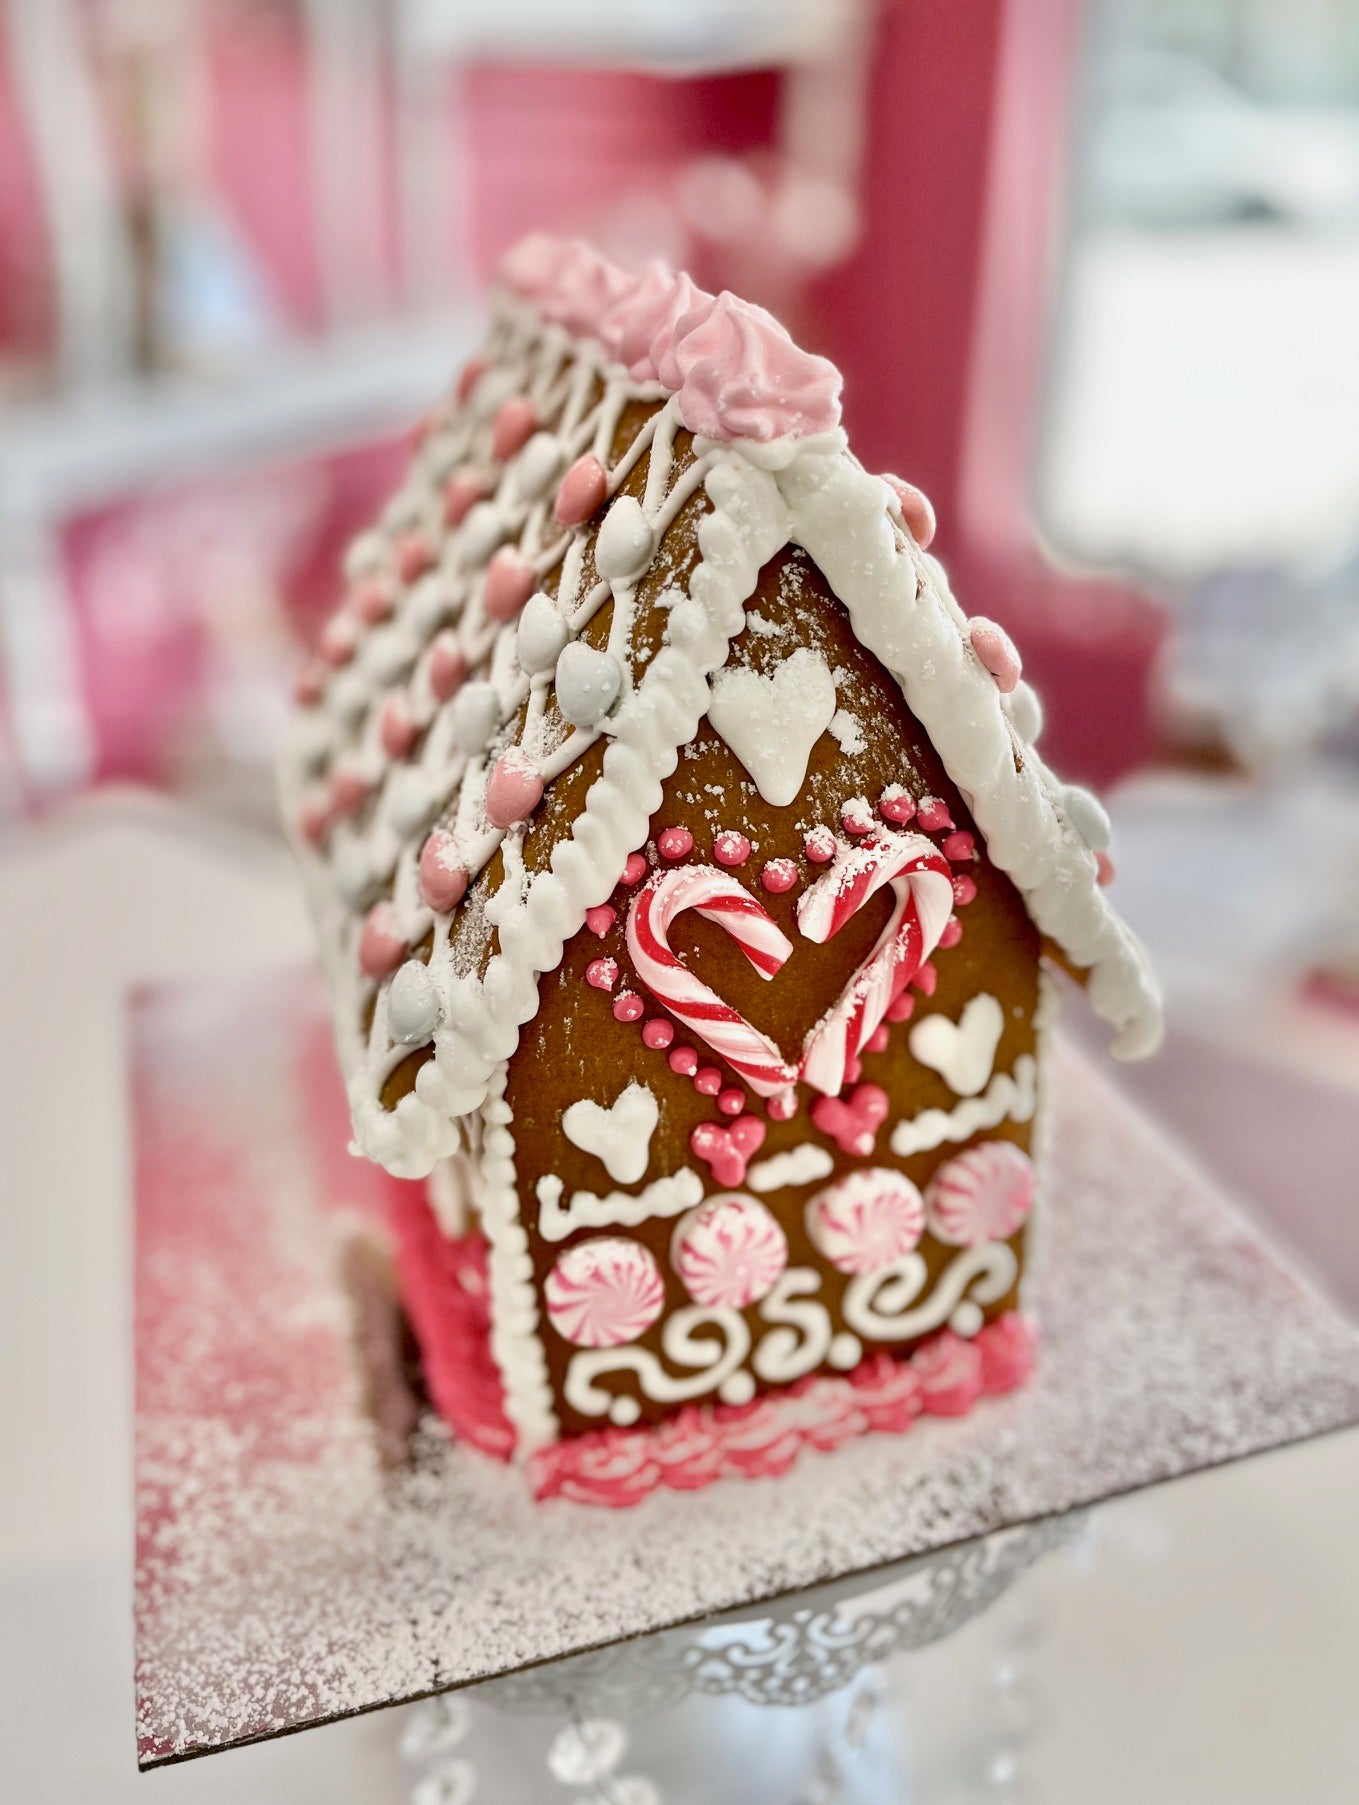 With Love - Gingerbread House